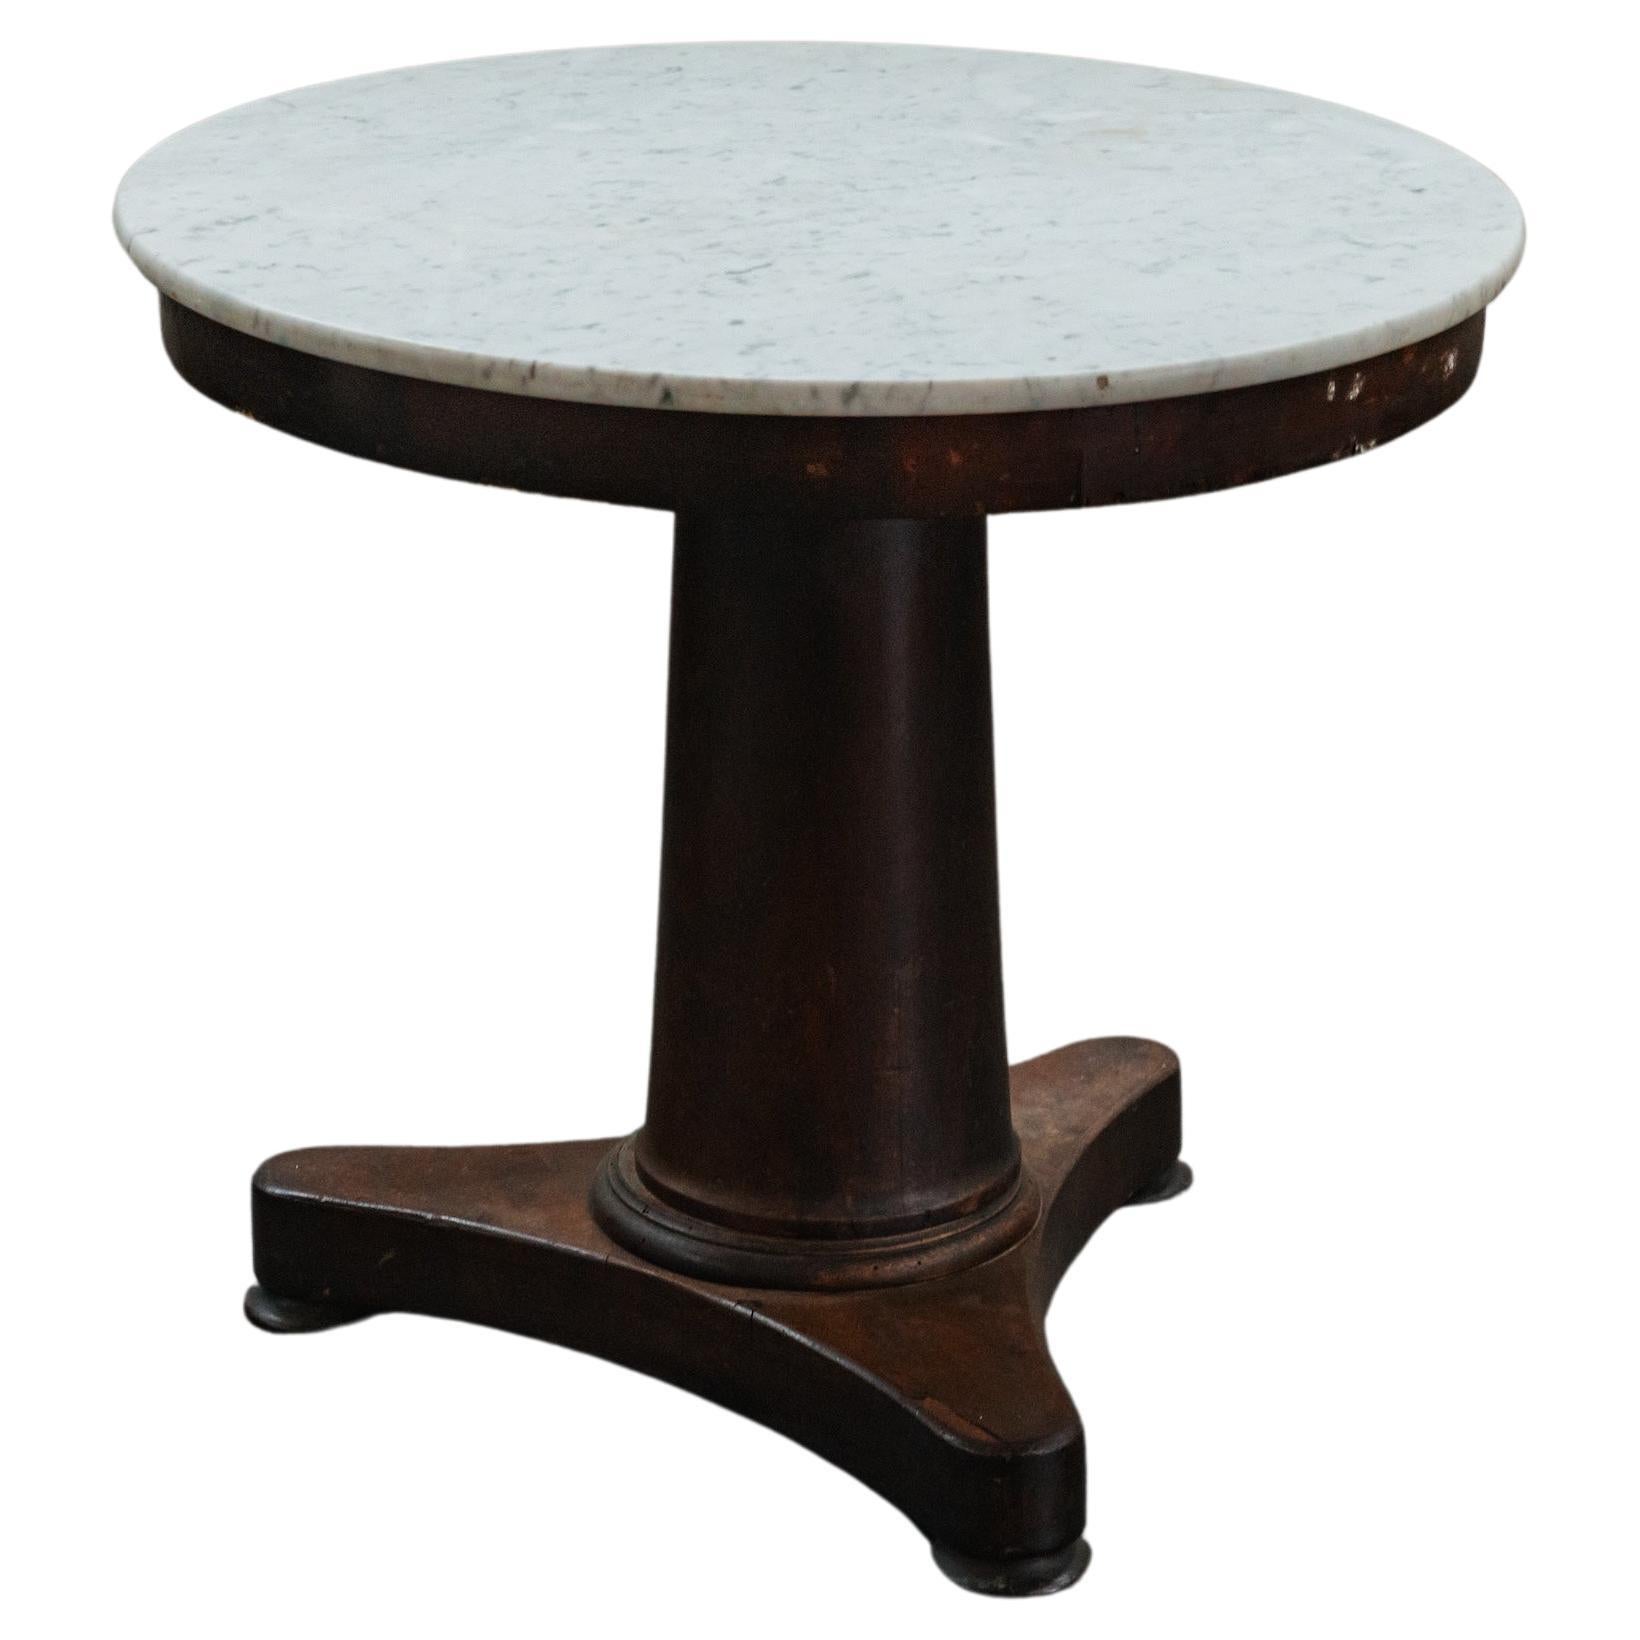 Vintage Marble Empire Table From France, Circa 1900 For Sale